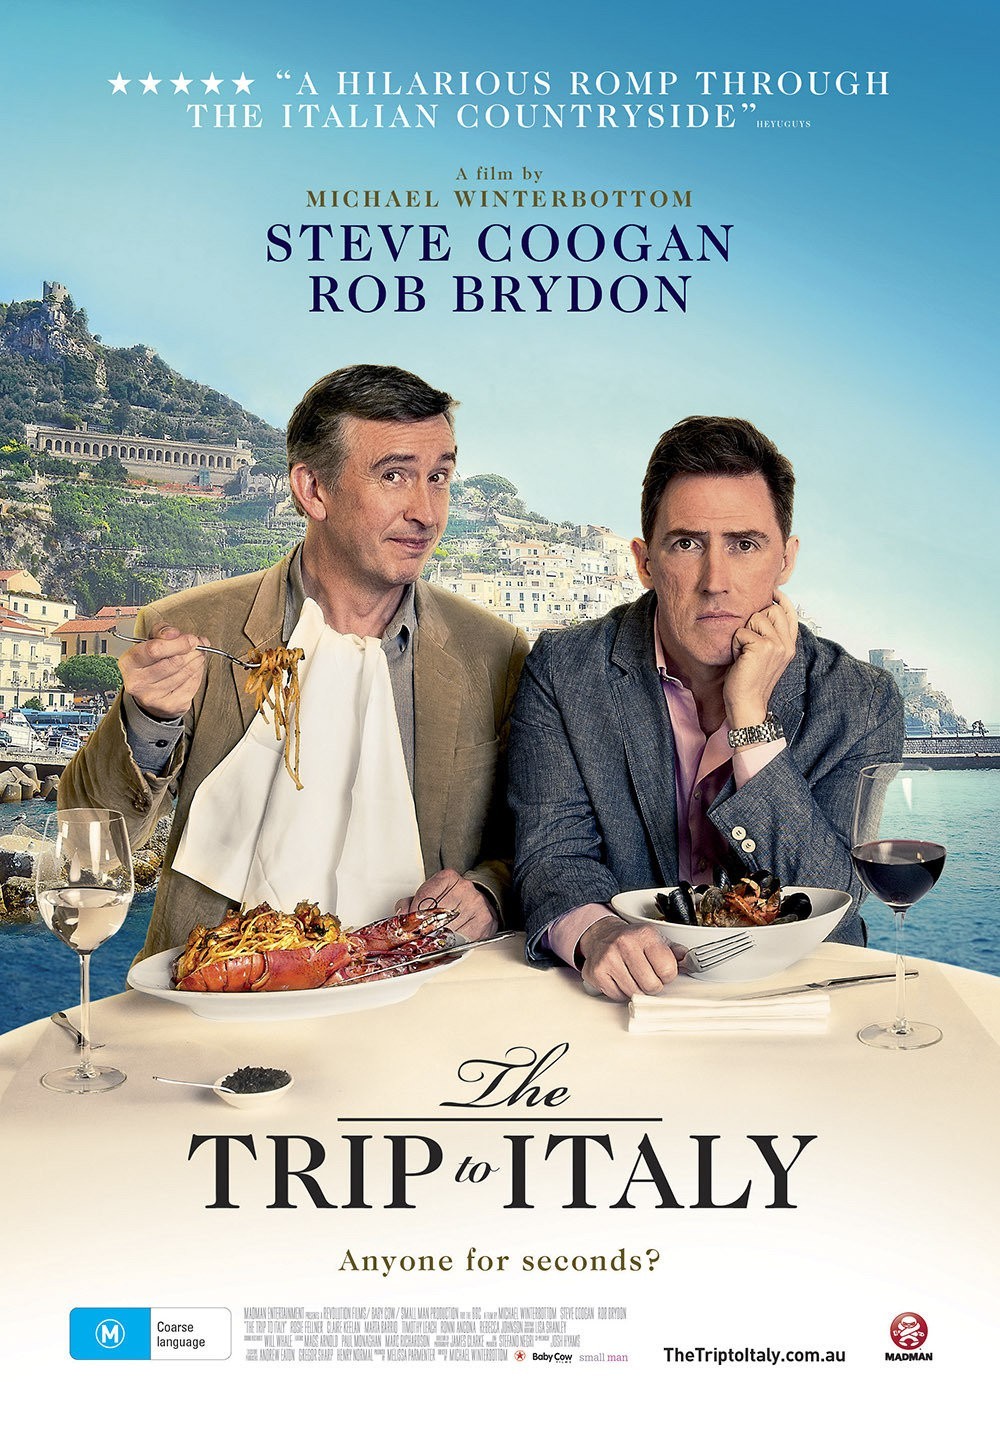 the trip to italy soundtrack opera